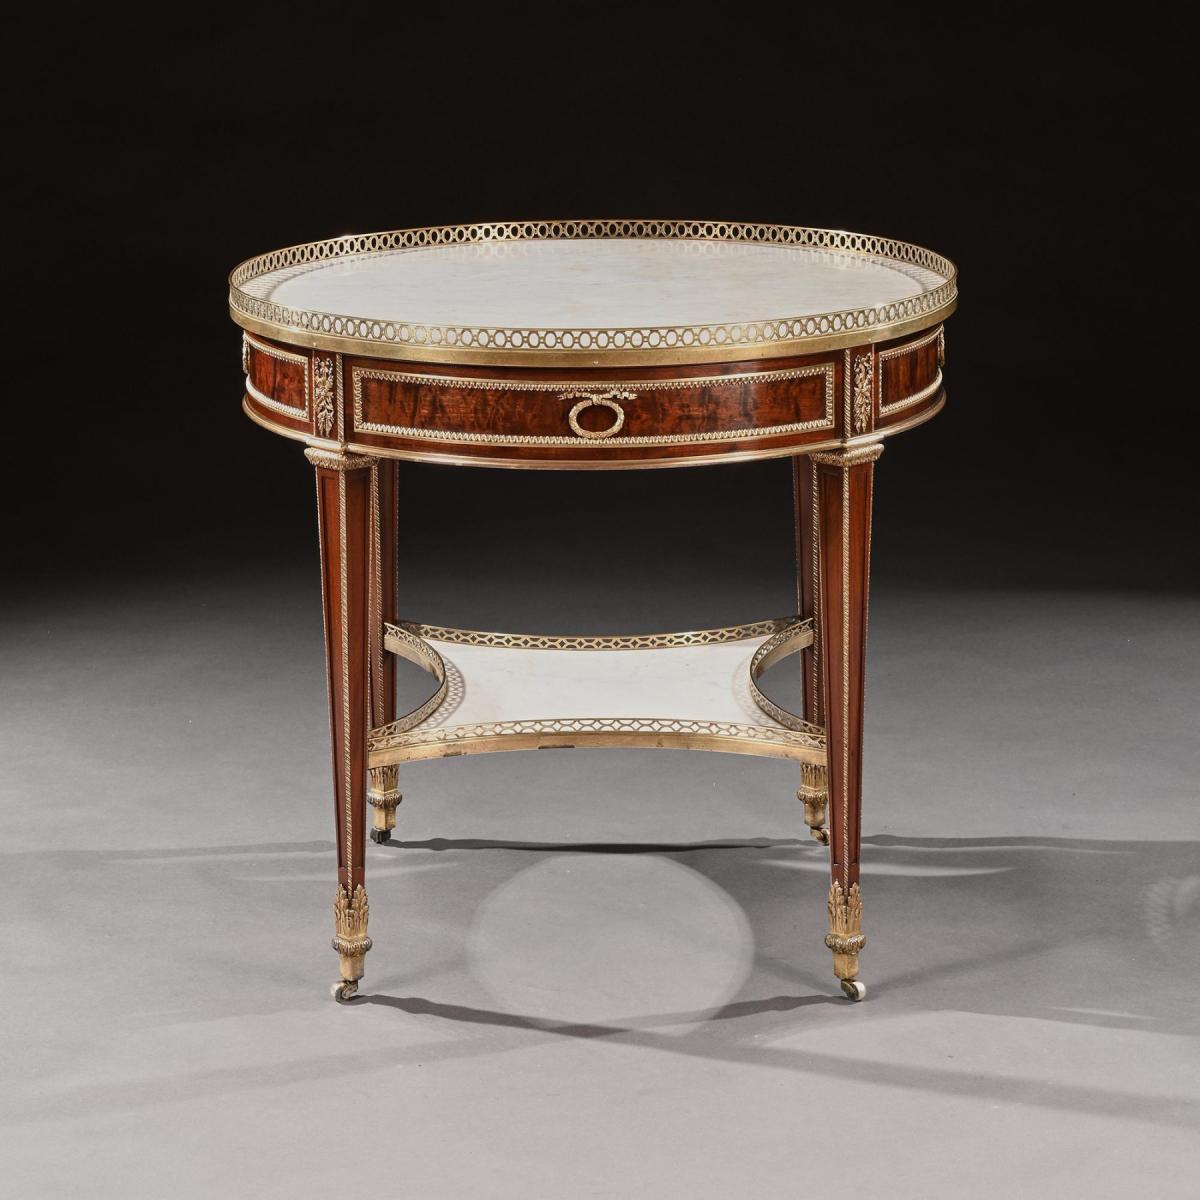 Gervais Durand 19th Century Mahogany and Gilt Bronze Gueridon Bouillotte Table